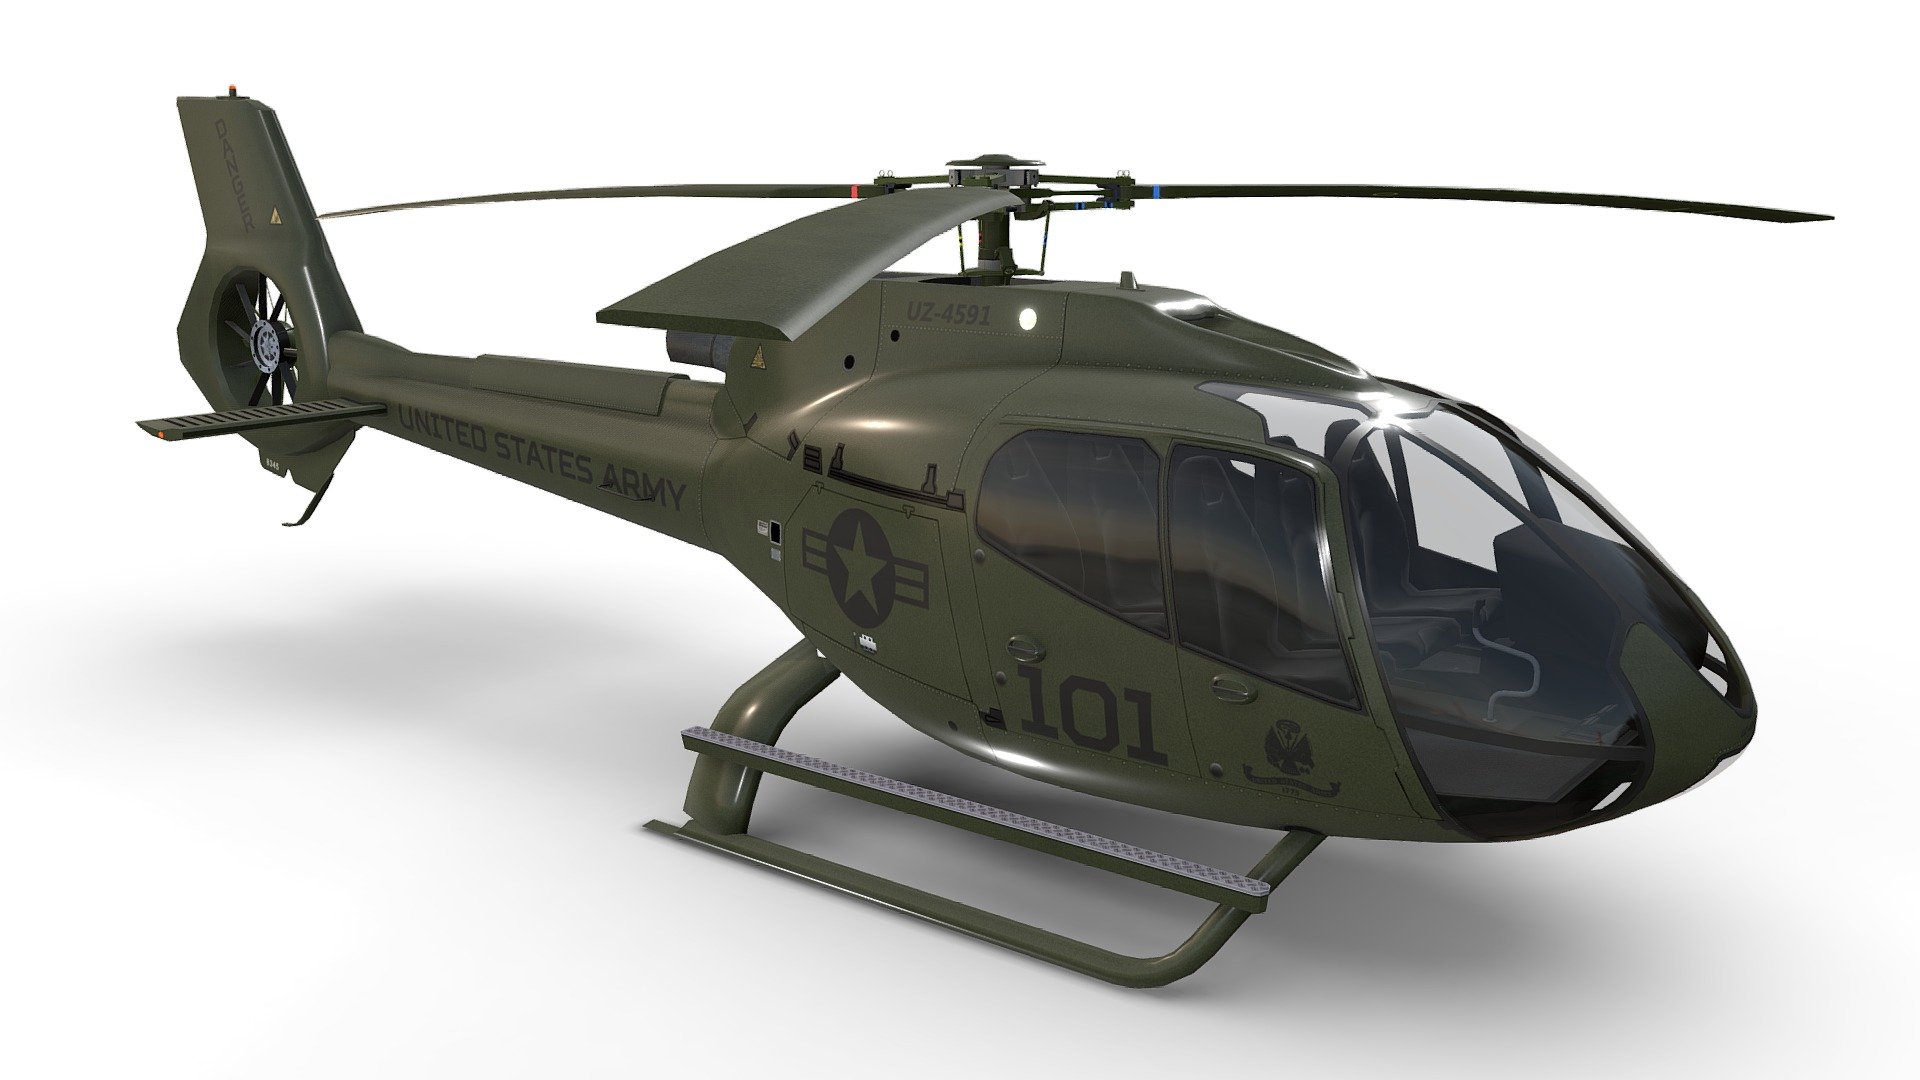 Low poly helicopter with 4 preconfigured level of detail

Made using blueprints in real world scale meters

LOD0 is the HQ version of the asset with bended top rotor and tiny parts

All other LOD are made unsolicited and voluntarily

LOD0 19710 tris, LOD1 10462 tris, LOD2 7388 tris, LOD3 5990 tris

All meshes are clean and 100% human controlled triangulated

Properly placed rotors pivots for flawless rotations

Simple capsule built interior that however fits perfectly the body

Non-overlapping unwrapped with best mapping for brandings

Both PBR workflows ready native 4K textures

Decreasing physical resolution to 2K results in a still decent looking heli

All liveries within the Airbus H130 series are interchangeable

For this purpose change just the 3 x albedo maps for body, rotors, interior

All LOD are exported seperately and together in each file format

Included are multiple file formats and native textures for download
 - US Army Helicopter Airbus H130 Livery 35 - Buy Royalty Free 3D model by RealtimeModels 3d model